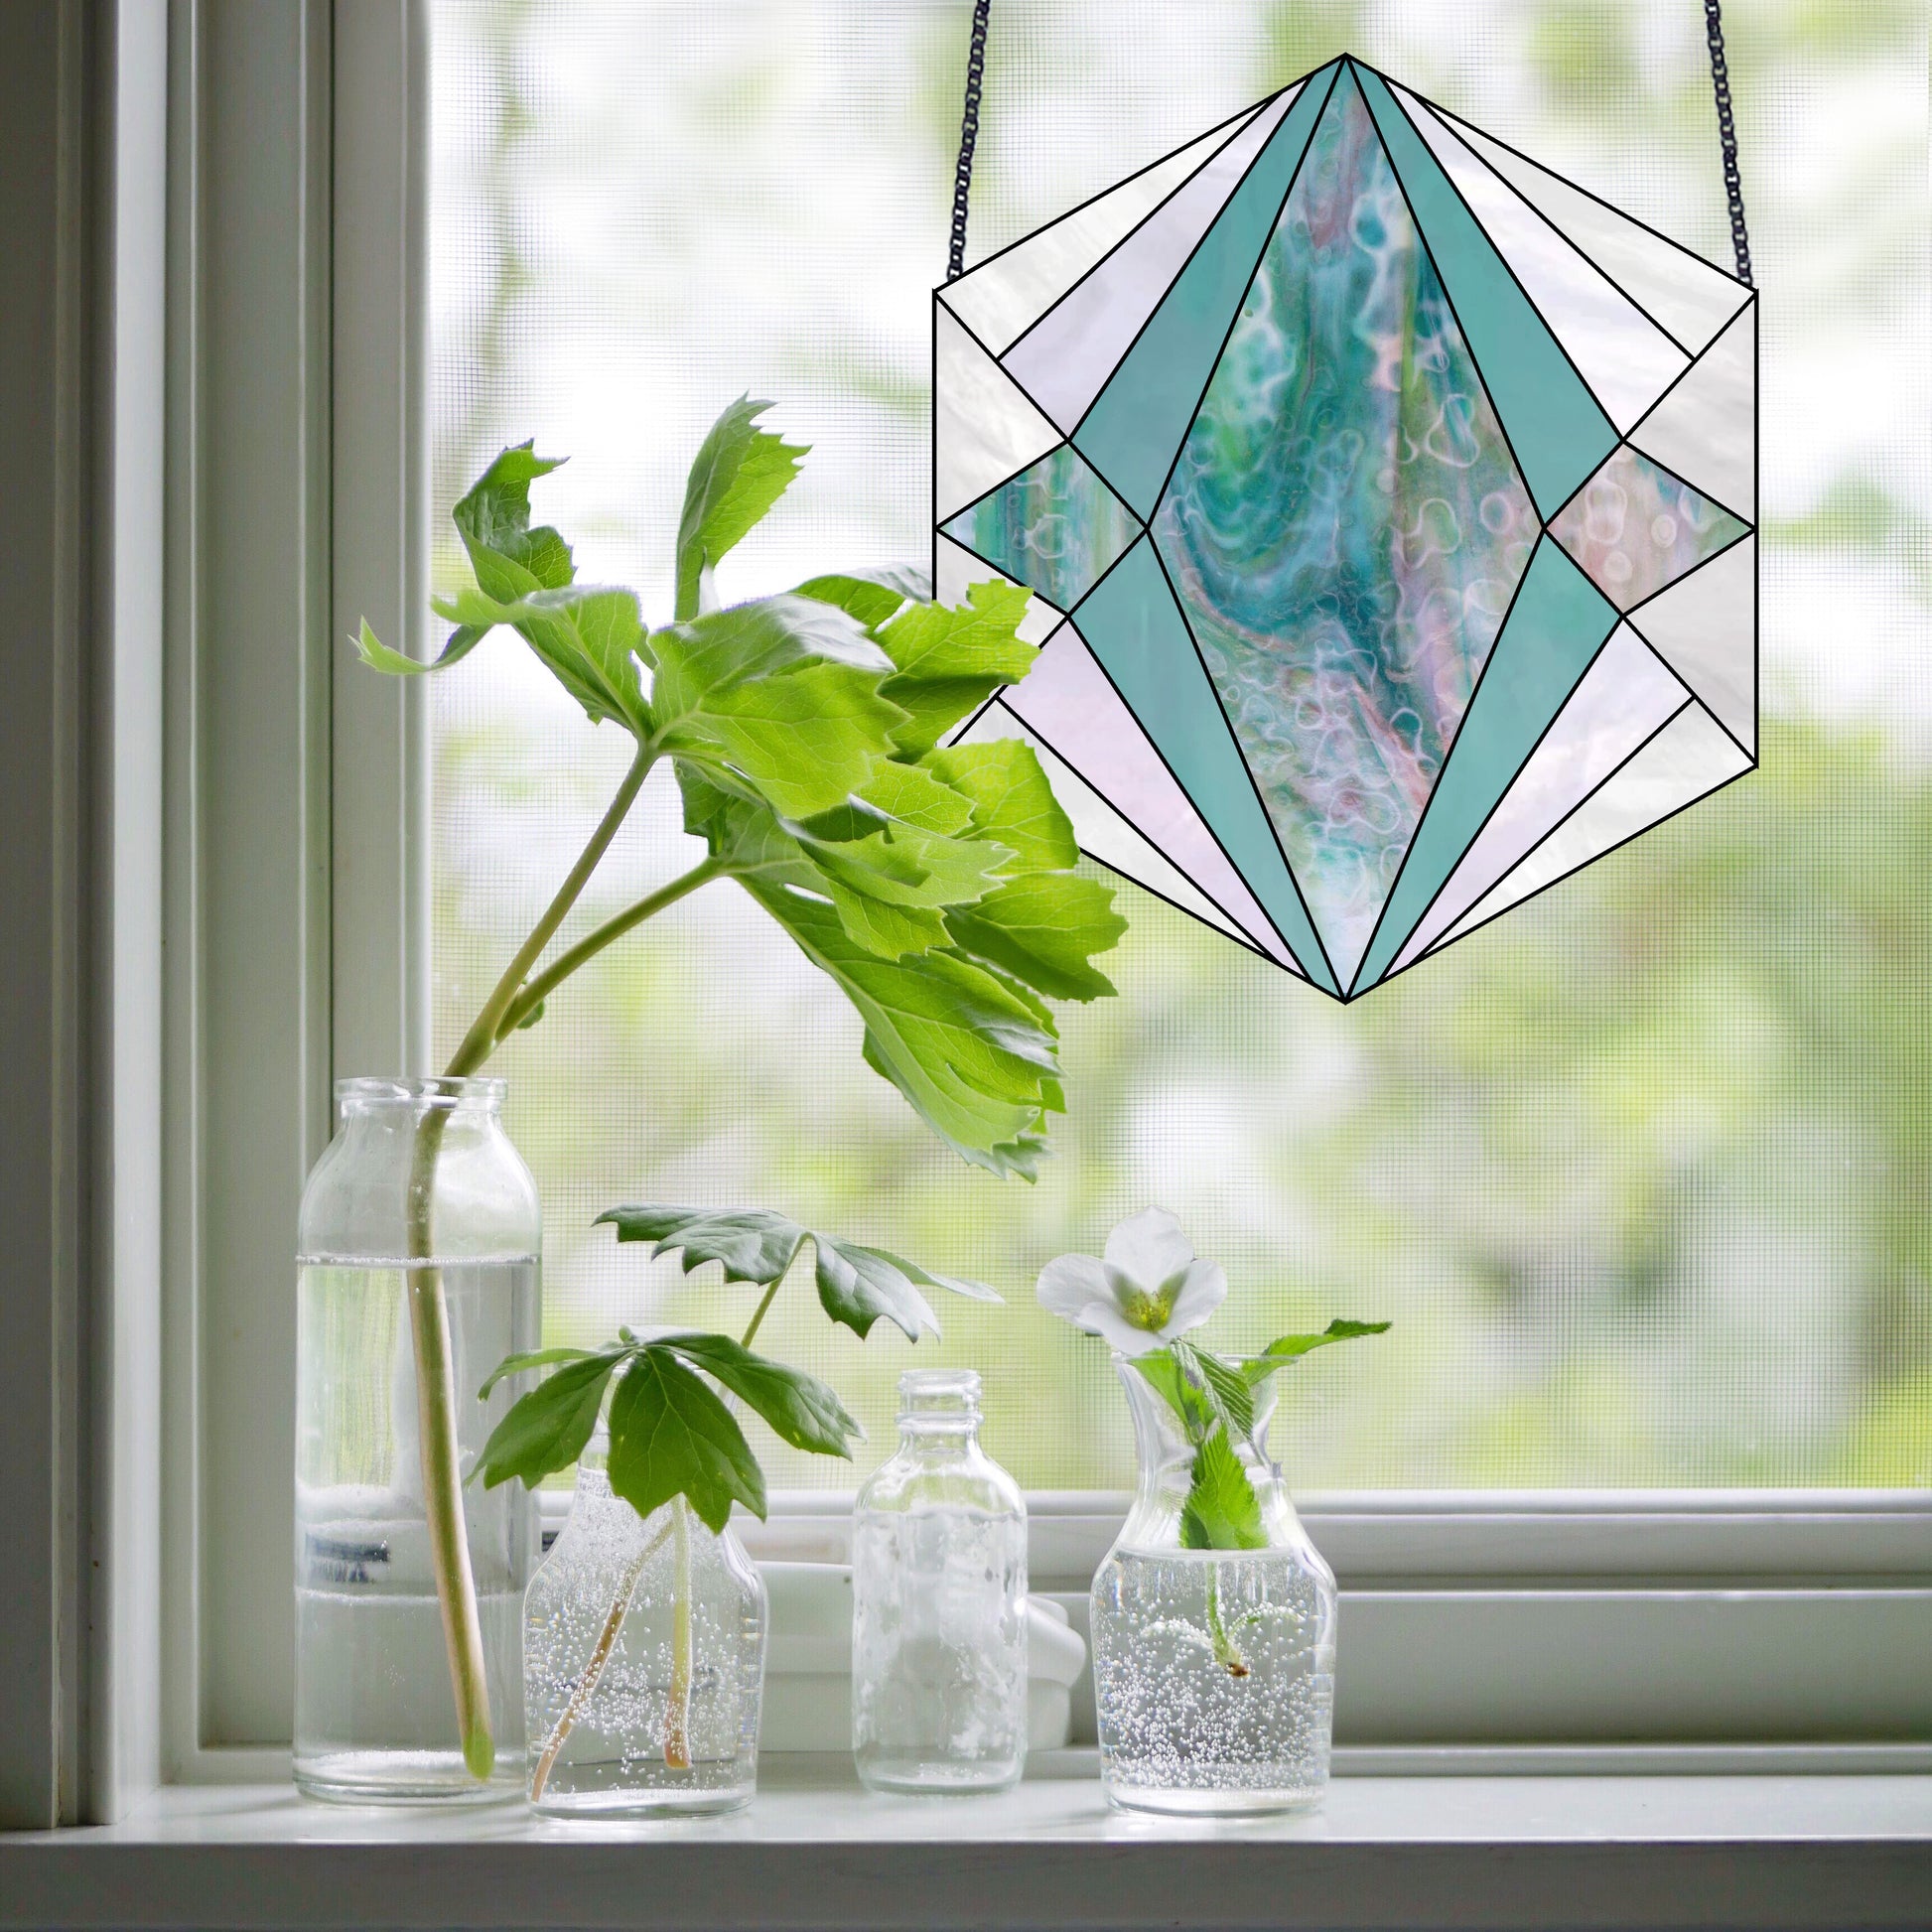 Beginner stained glass pattern for a boho geometric hexagon, instant PDF download, hanging in a window with plants